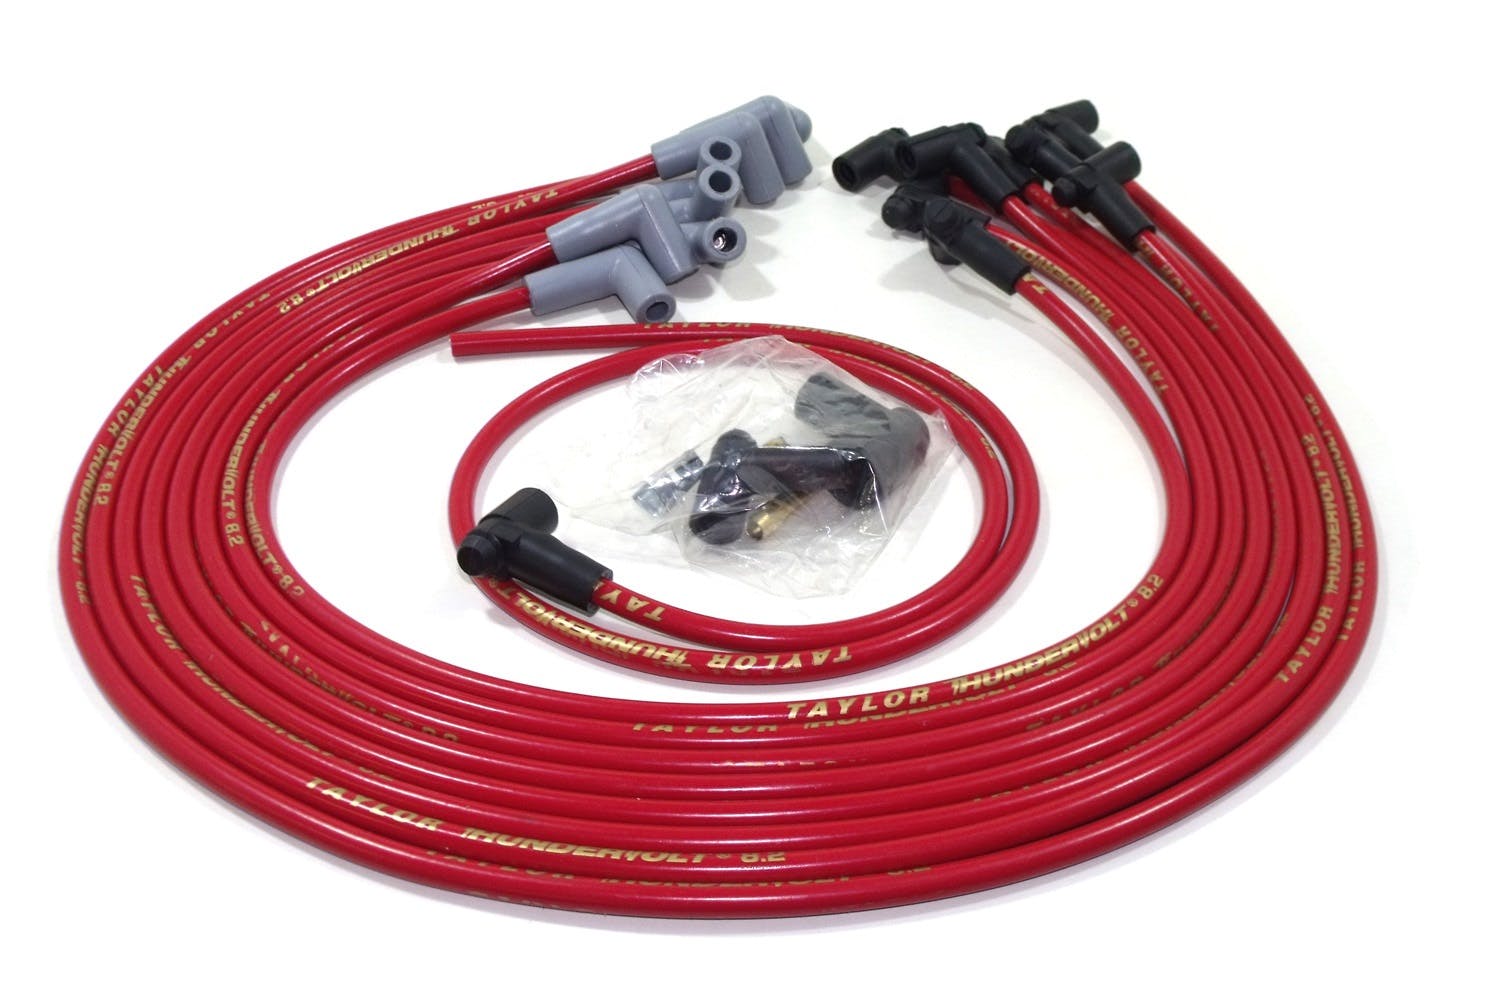 Taylor Cable Products 86202 Thundervolt 8.2 race fit 8 cyl red